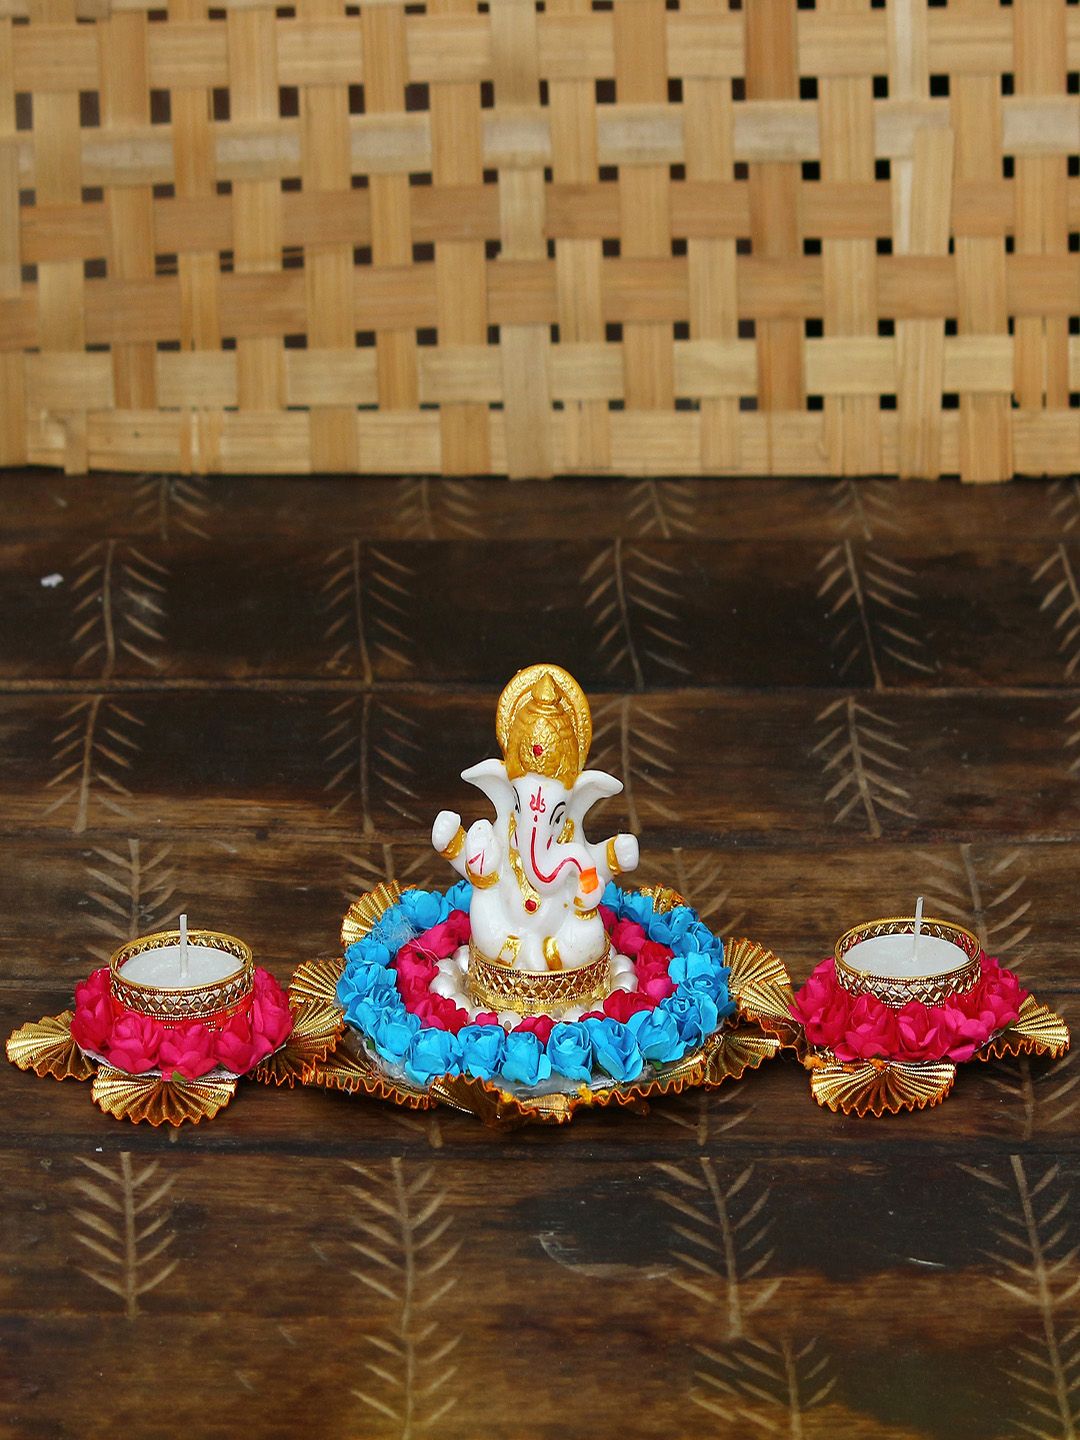 eCraftIndia White & Blue Handcrafted Lord Ganesha Idol On Decorative Plate with Two Tealight Holders Showpiece Price in India